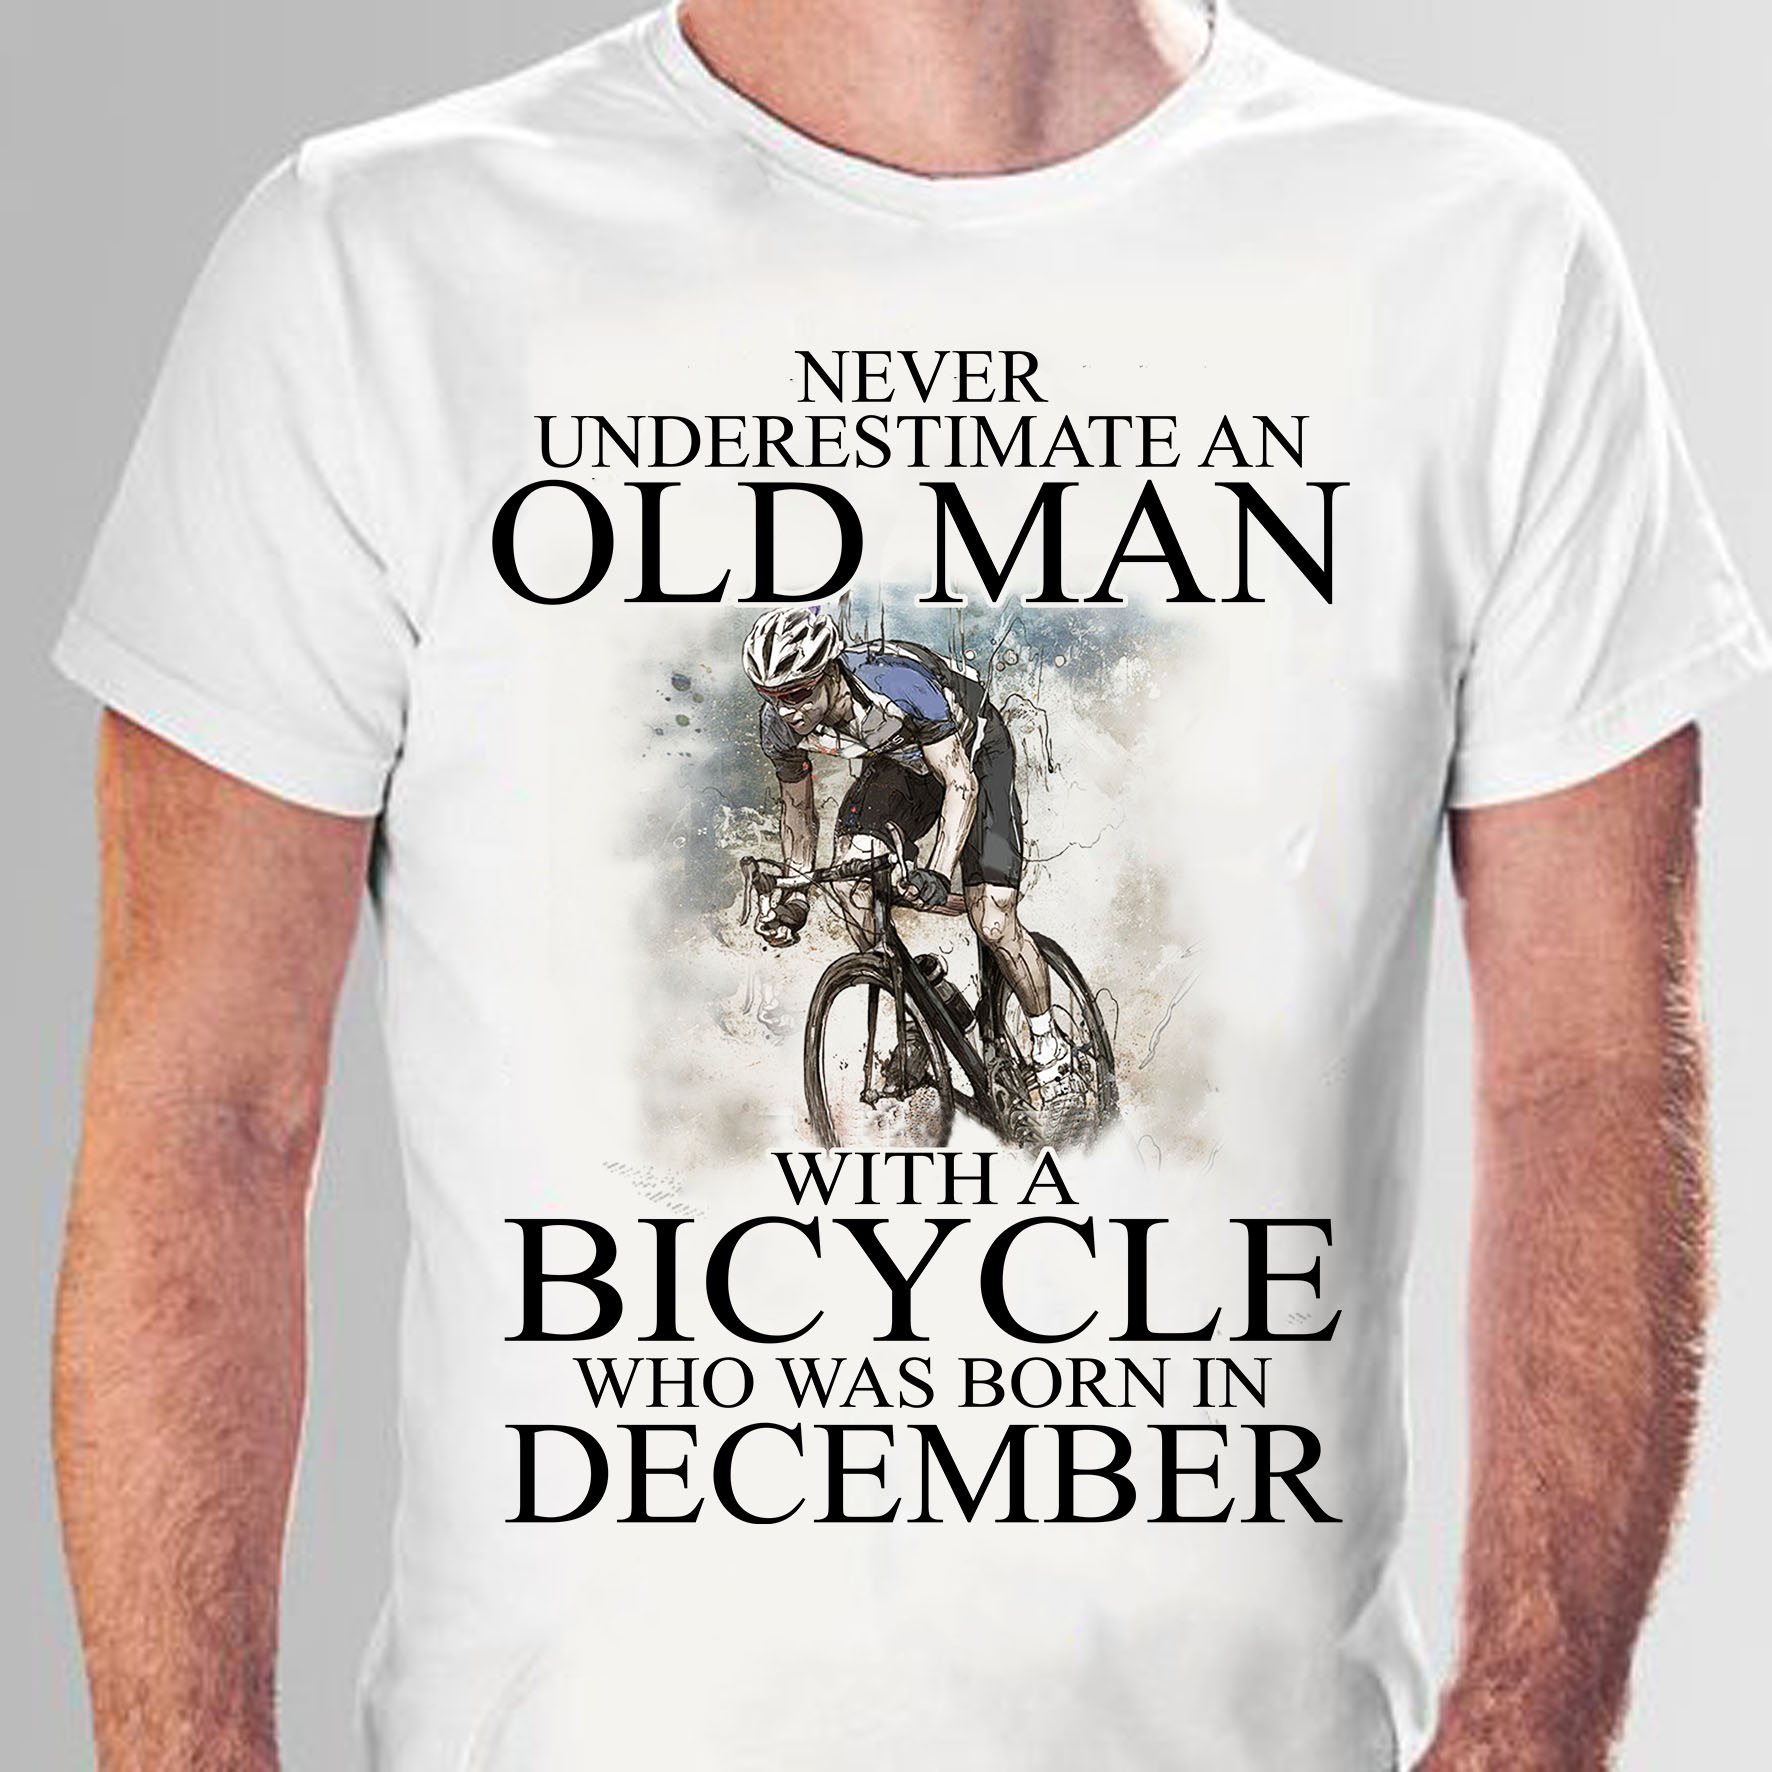 Never underestimate an old man with a bicycle who was born in December ...